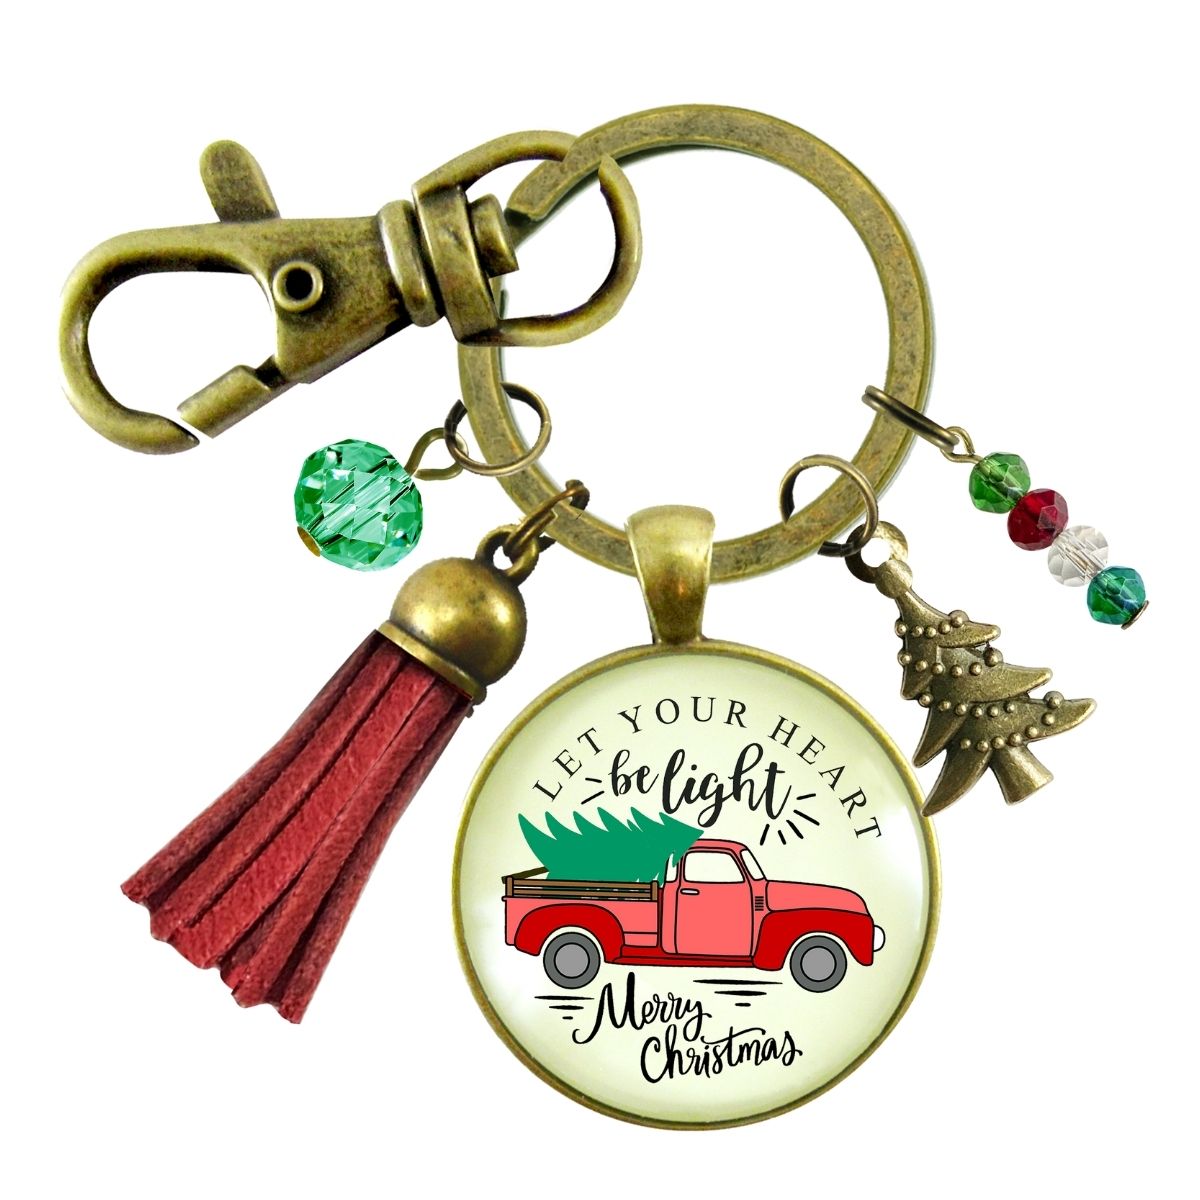 Red Truck Christmas Tree Keychain Handmade Holiday Let Your Heart Be Light Charm Gift Pendant Tassel Key Ring Jewelry   - Gutsy Goodness Handmade Jewelry